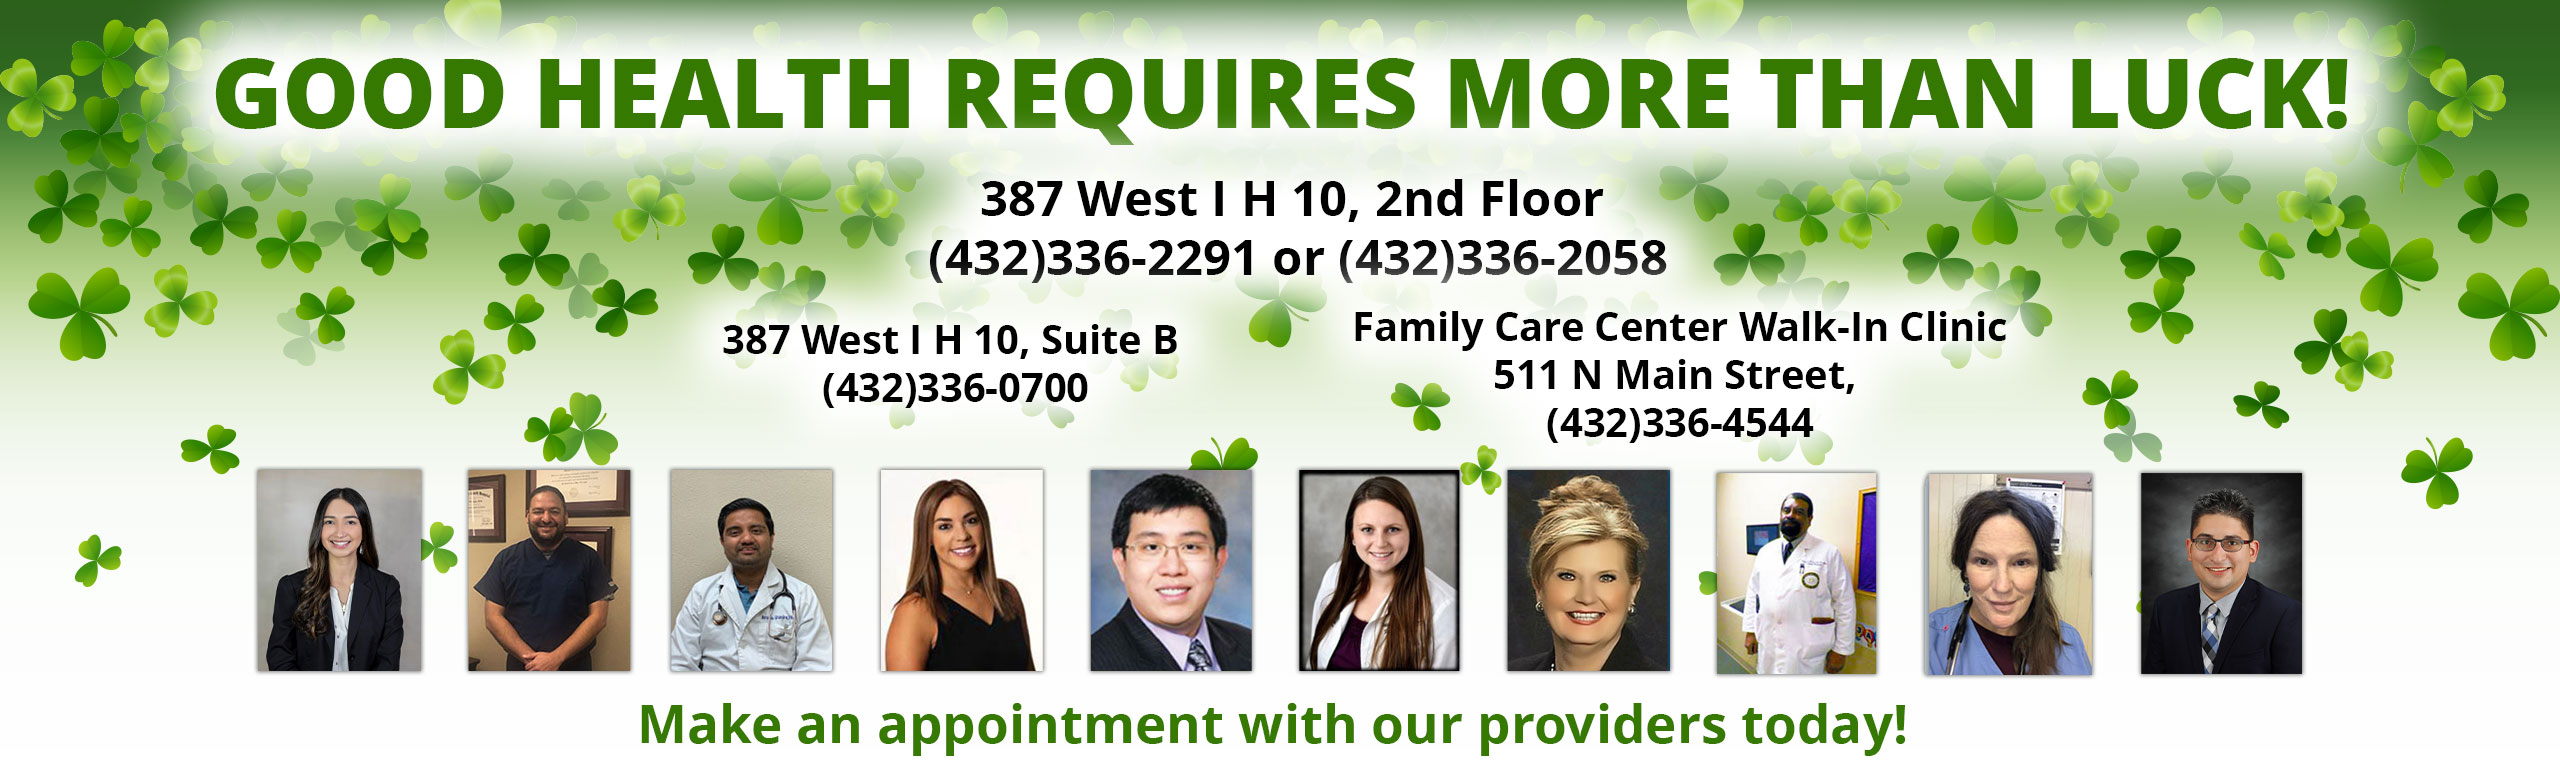 Banner picture of our Physicians (Males and Females). Banner says:
Your Health Can't Wait
387 West I H 10, 2nd Floor Fort Stockton, Texas 79735

 Office Phone Number (432)336-2291 Phone Number (432)336-2058

 

387 West I H 10, Suite B Fort Stockton, Texas 79735 Office Phone Number (432)336-0700

 

Family Care Center Walk-In Clinic

511 N Main Street, Fort Stockton, Texas 79735

Office Phone Number (432)336-4544